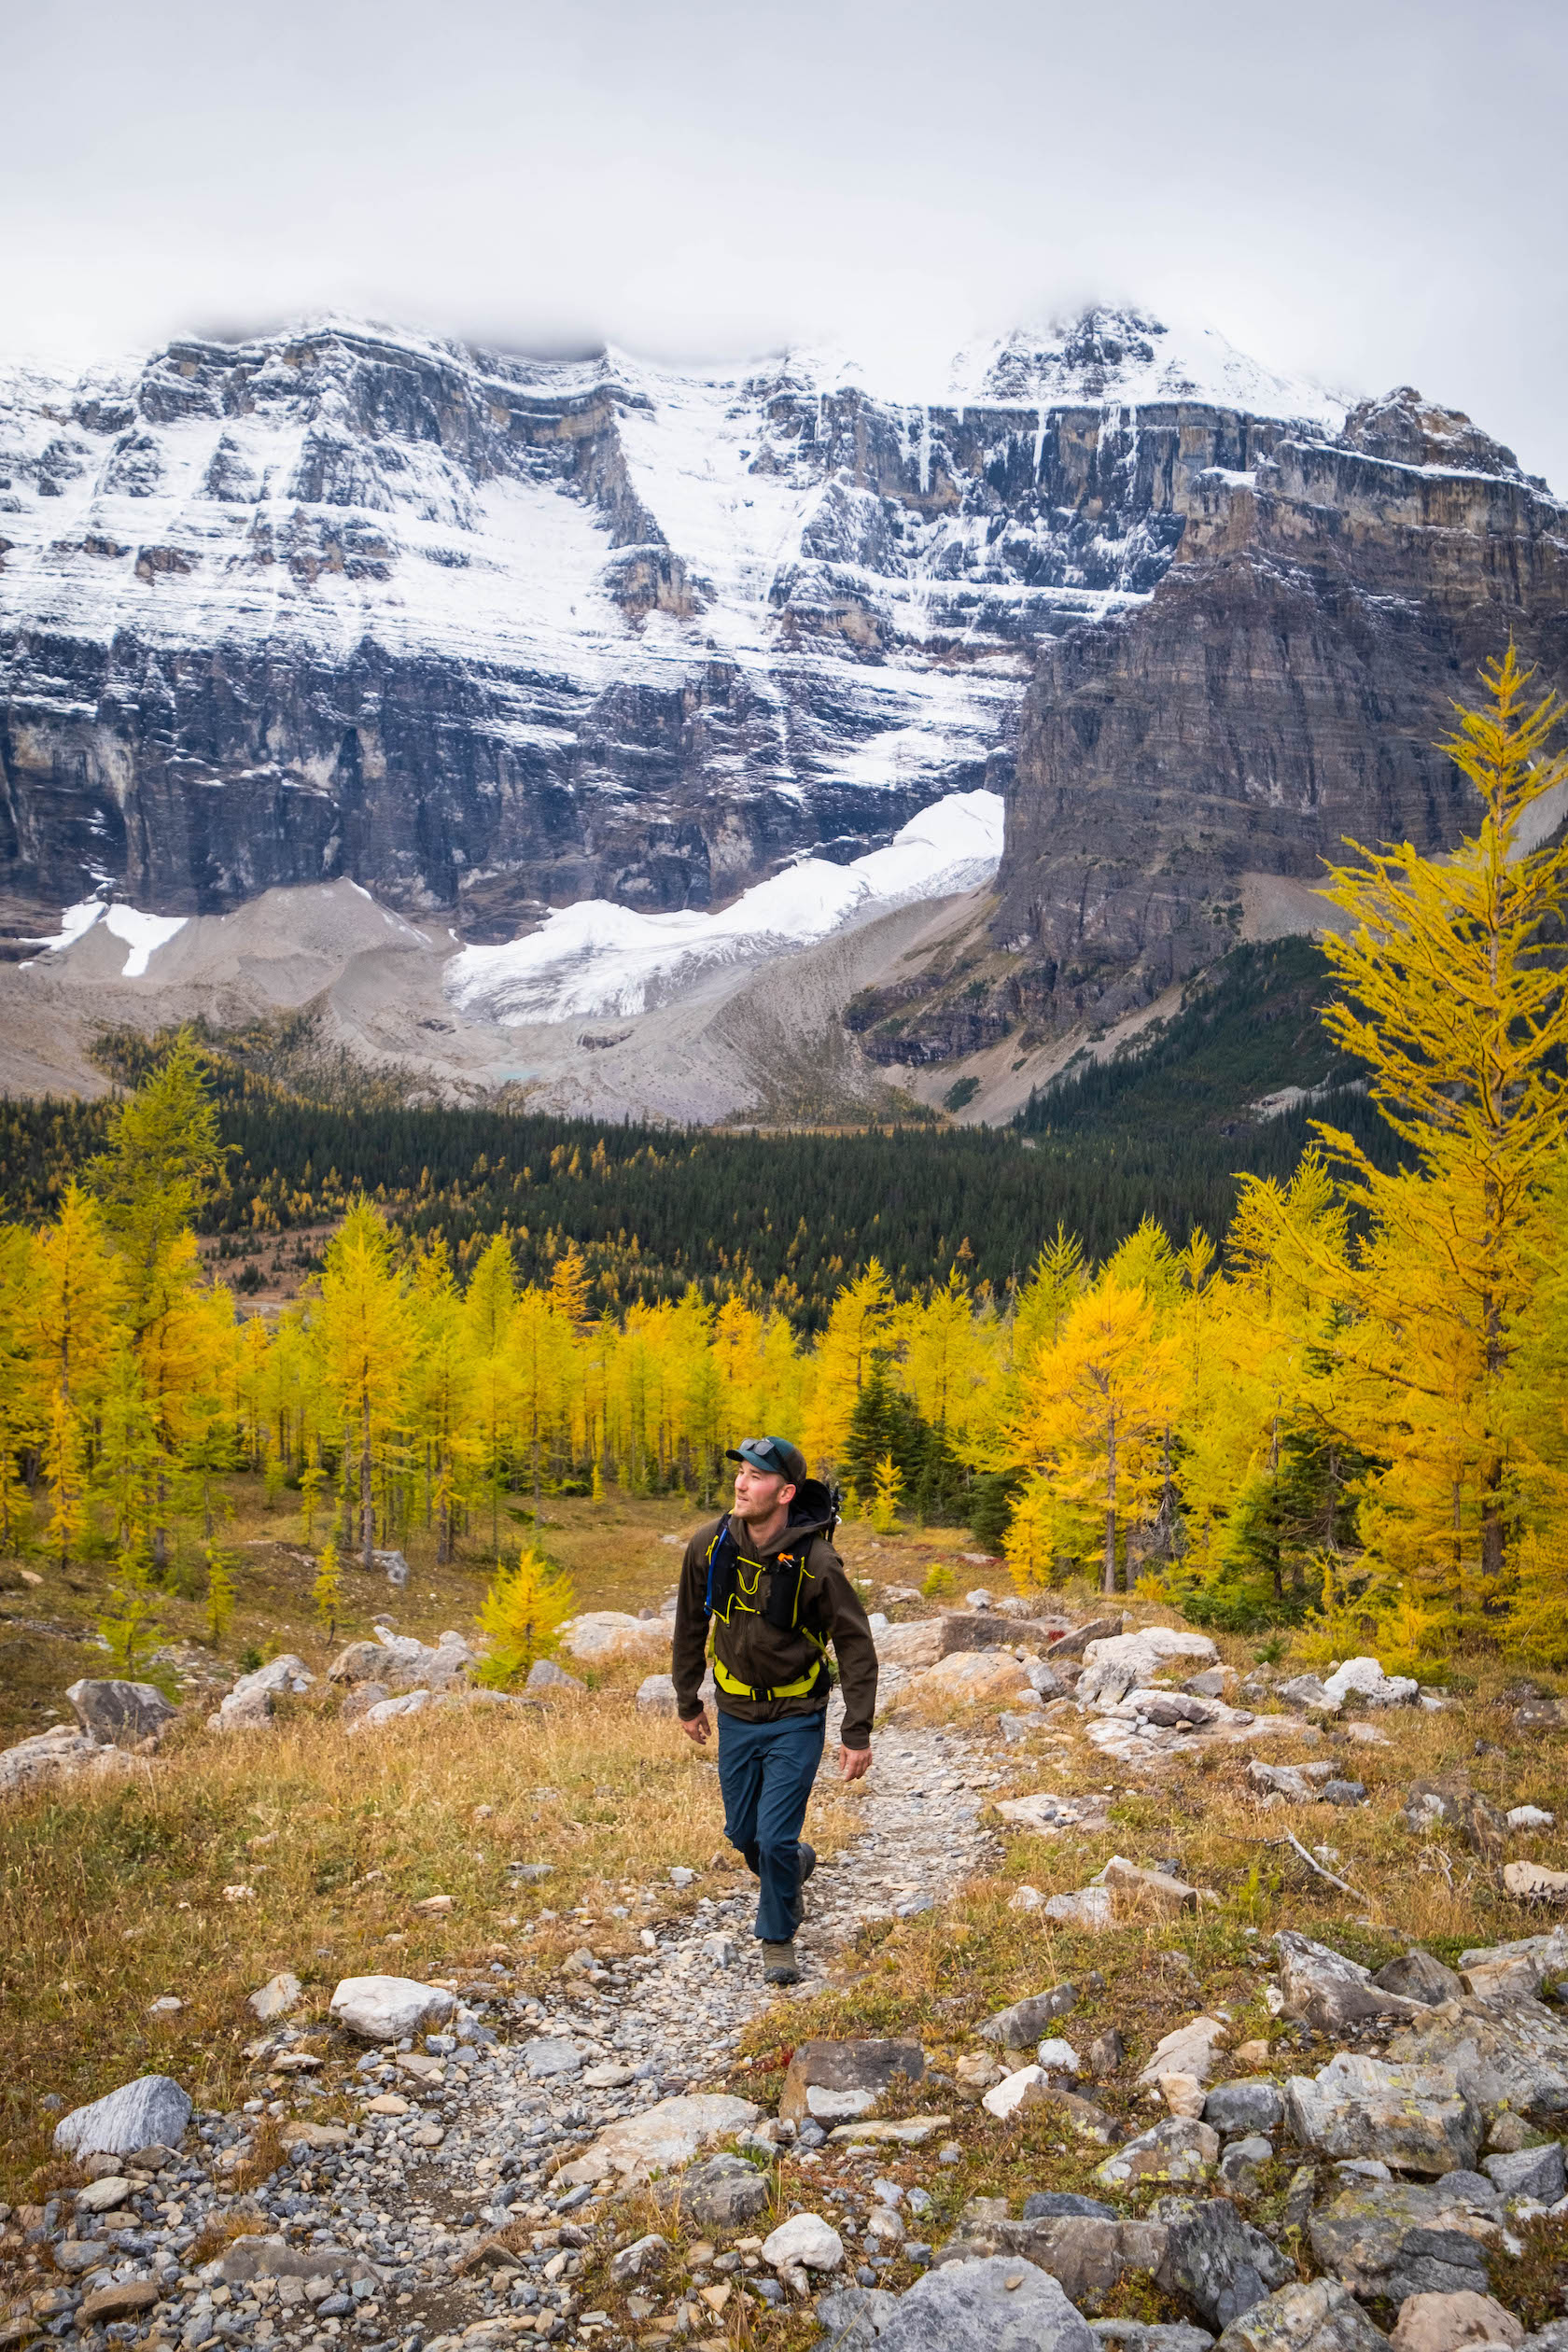 Cameron Hikes Through Larch Trees In Paradise Valley - September